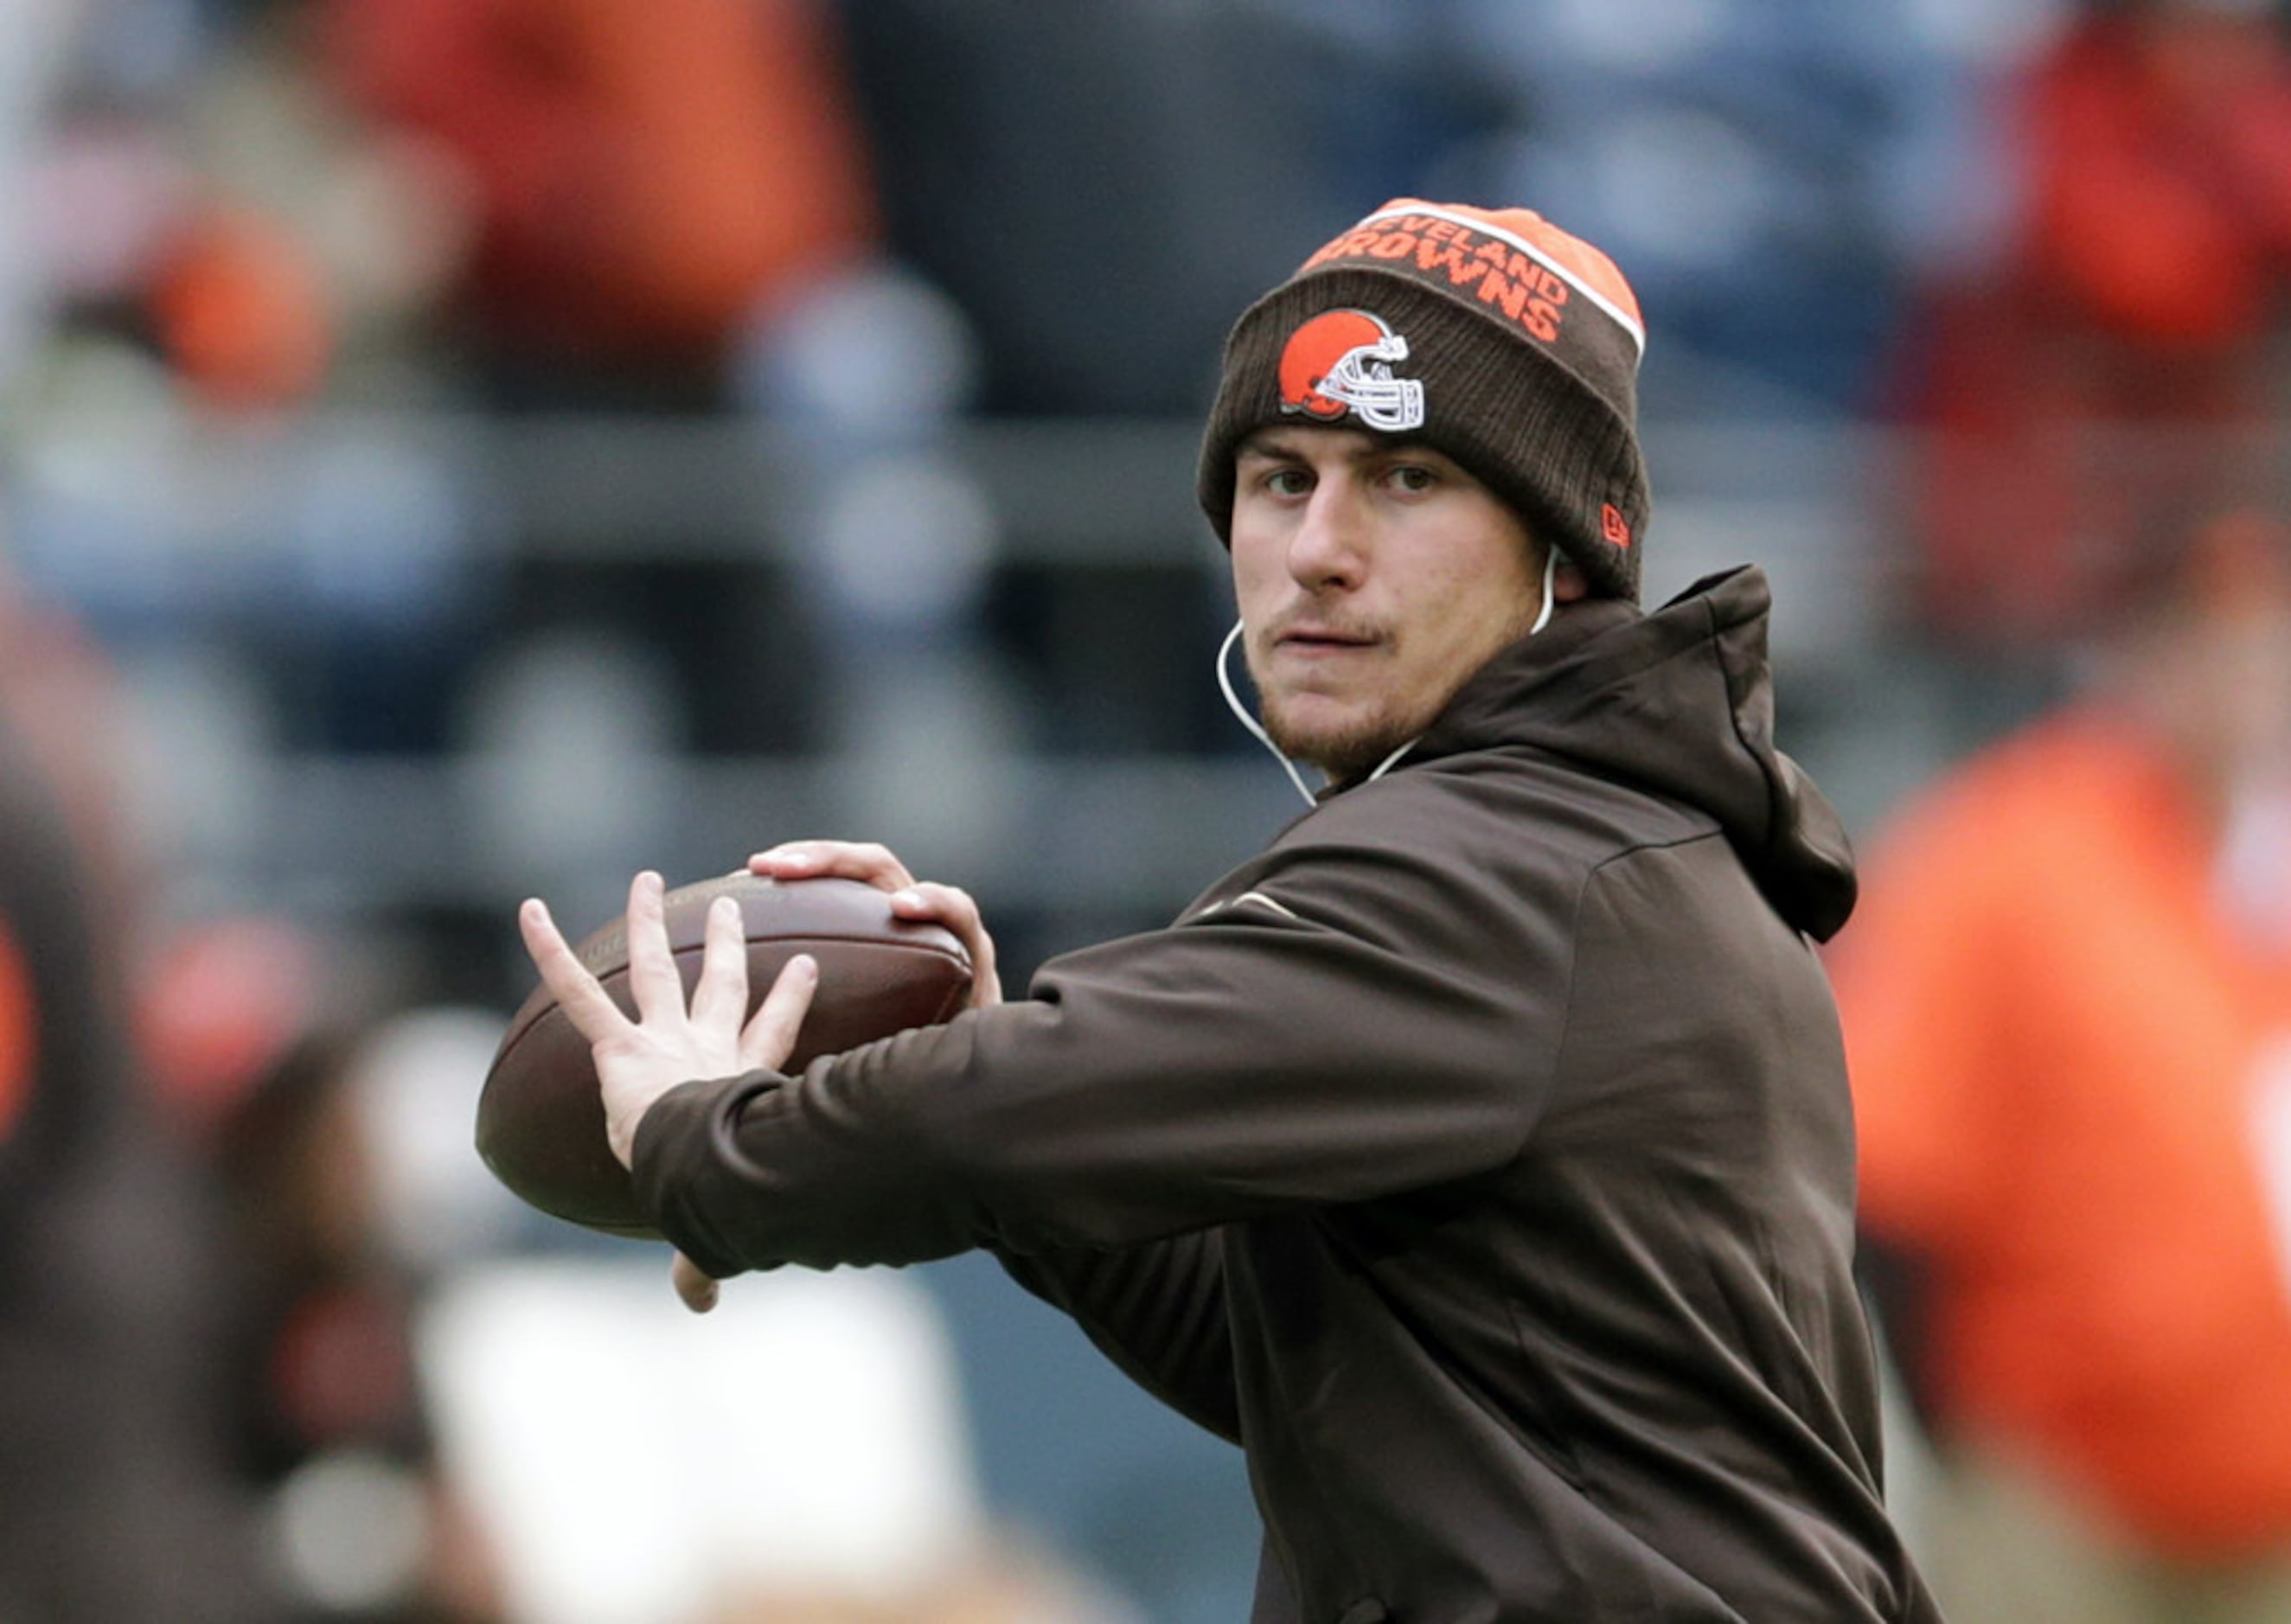 Johnny Manziel signs with CFL in path back to football